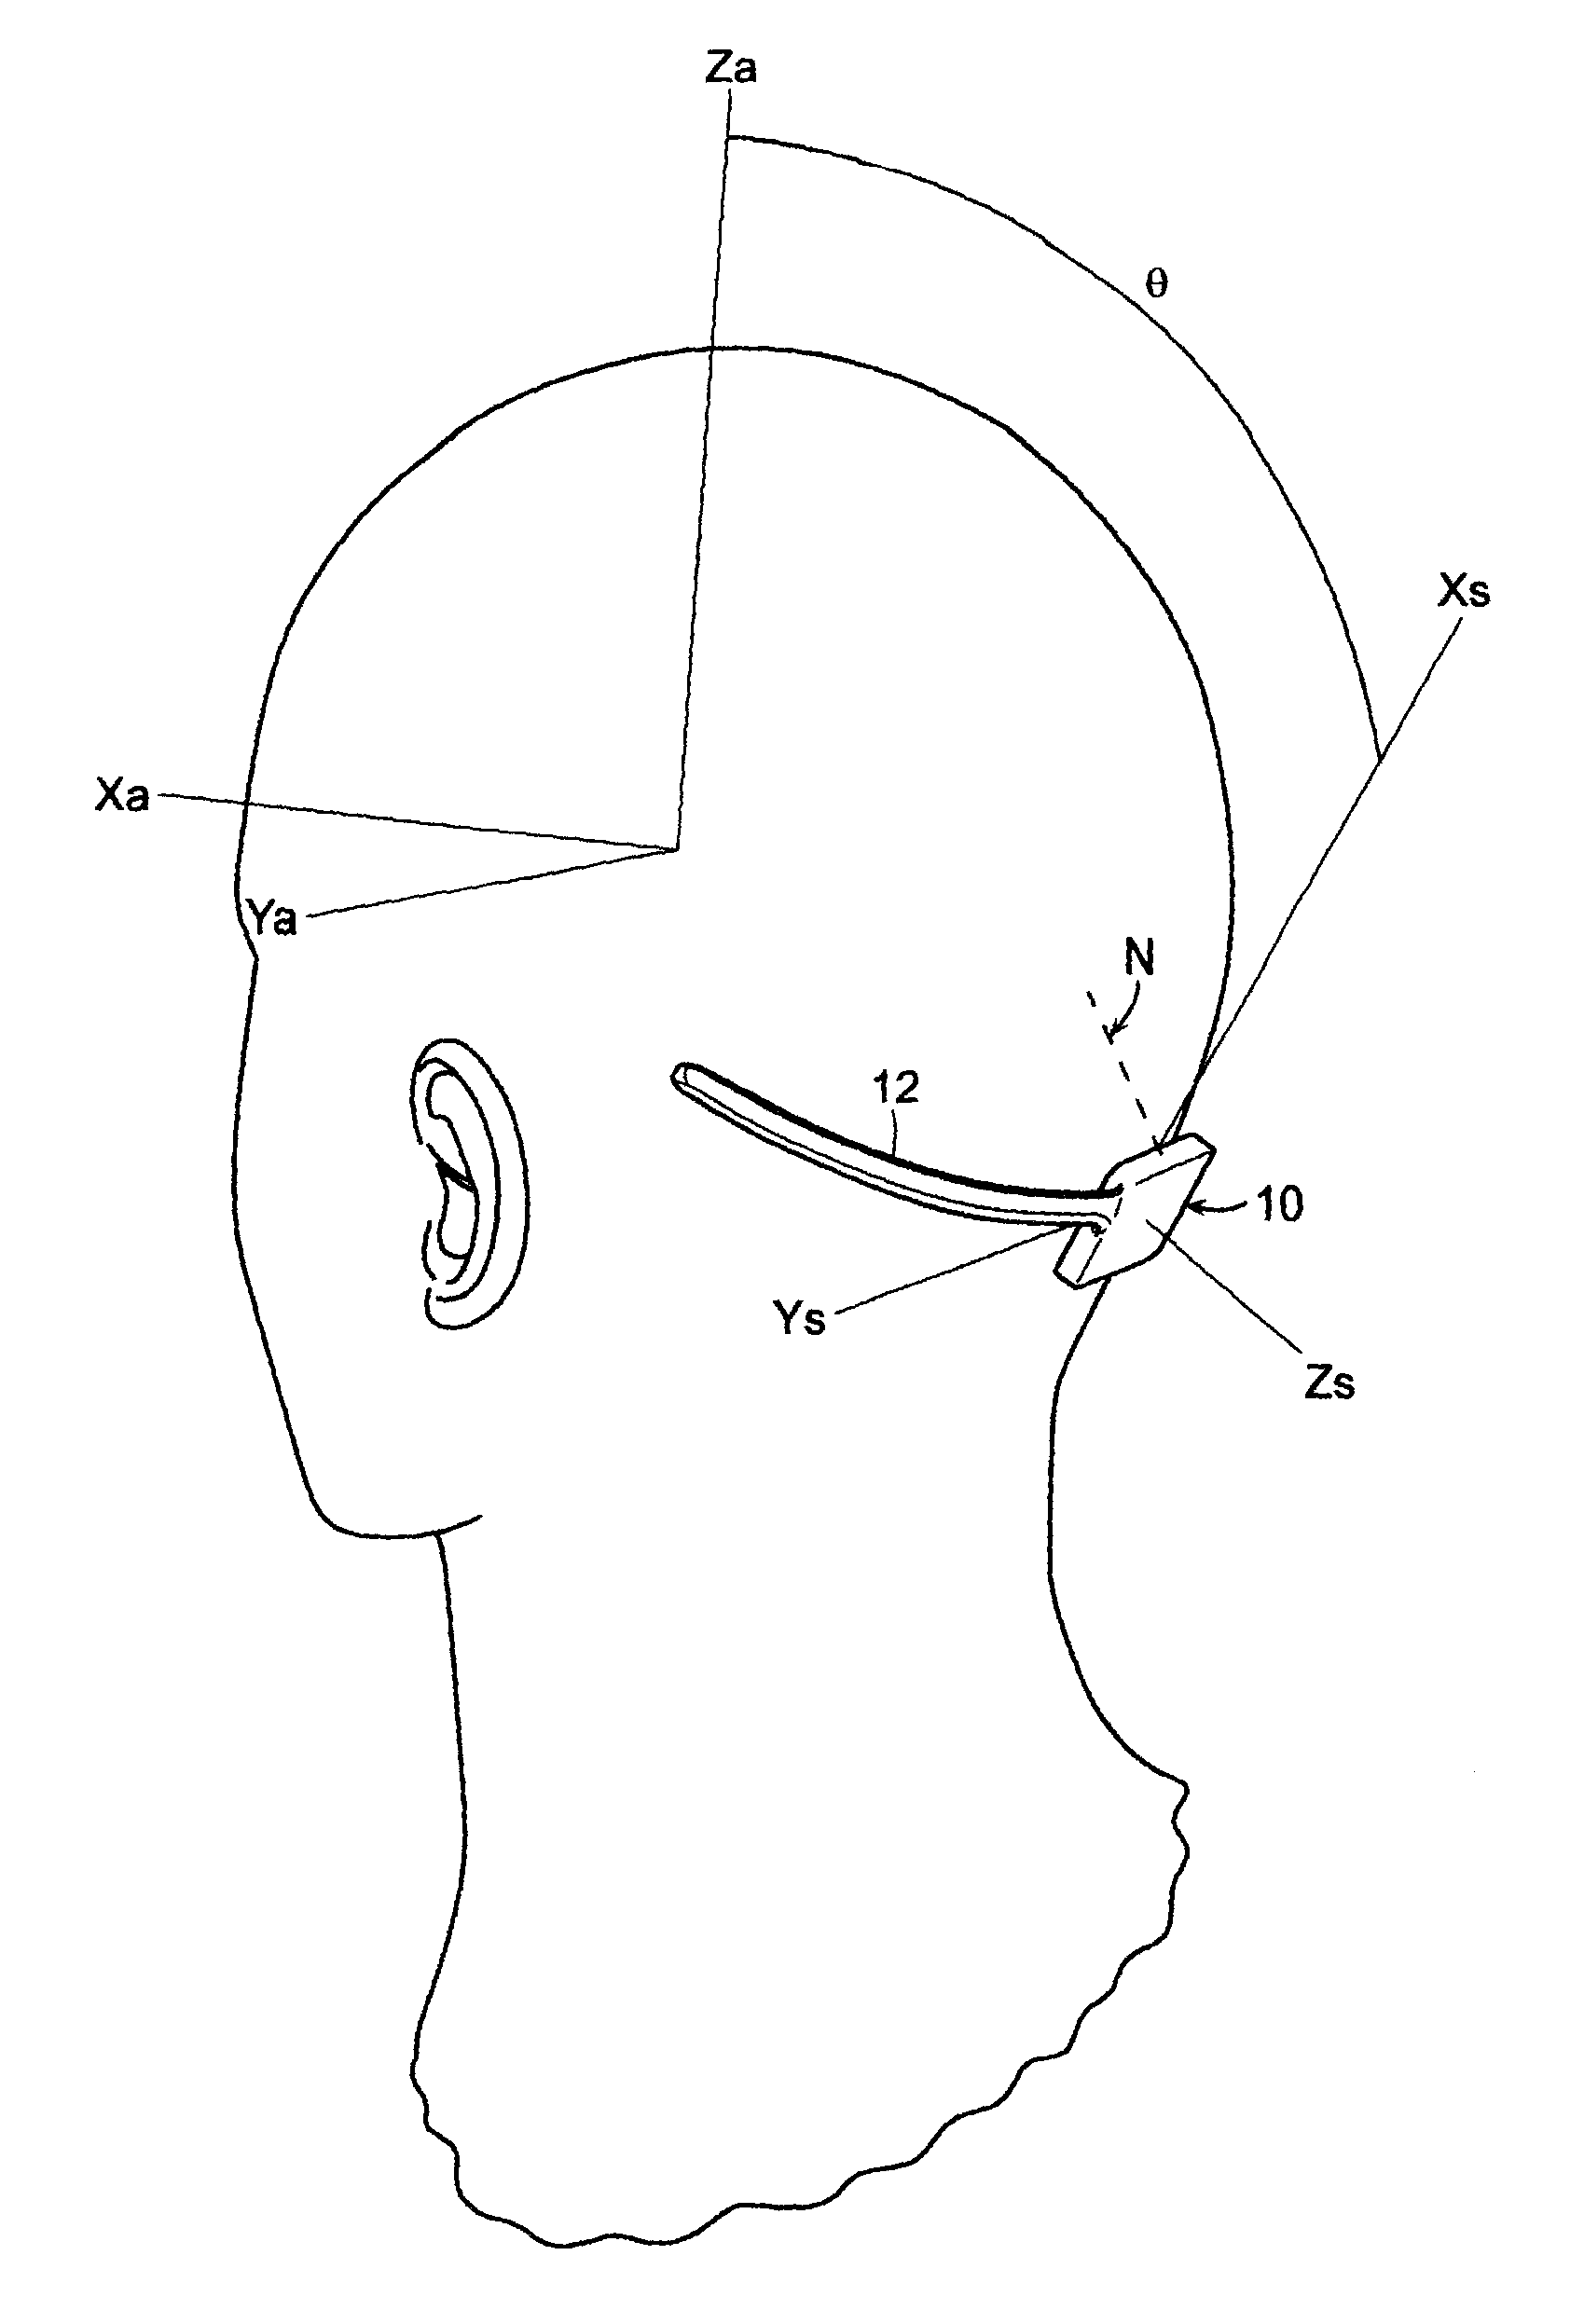 Sensor module for sensing forces to the head of an individual and wirelessly transmitting signals corresponding thereto for analysis, tracking and/or reporting the sensed forces